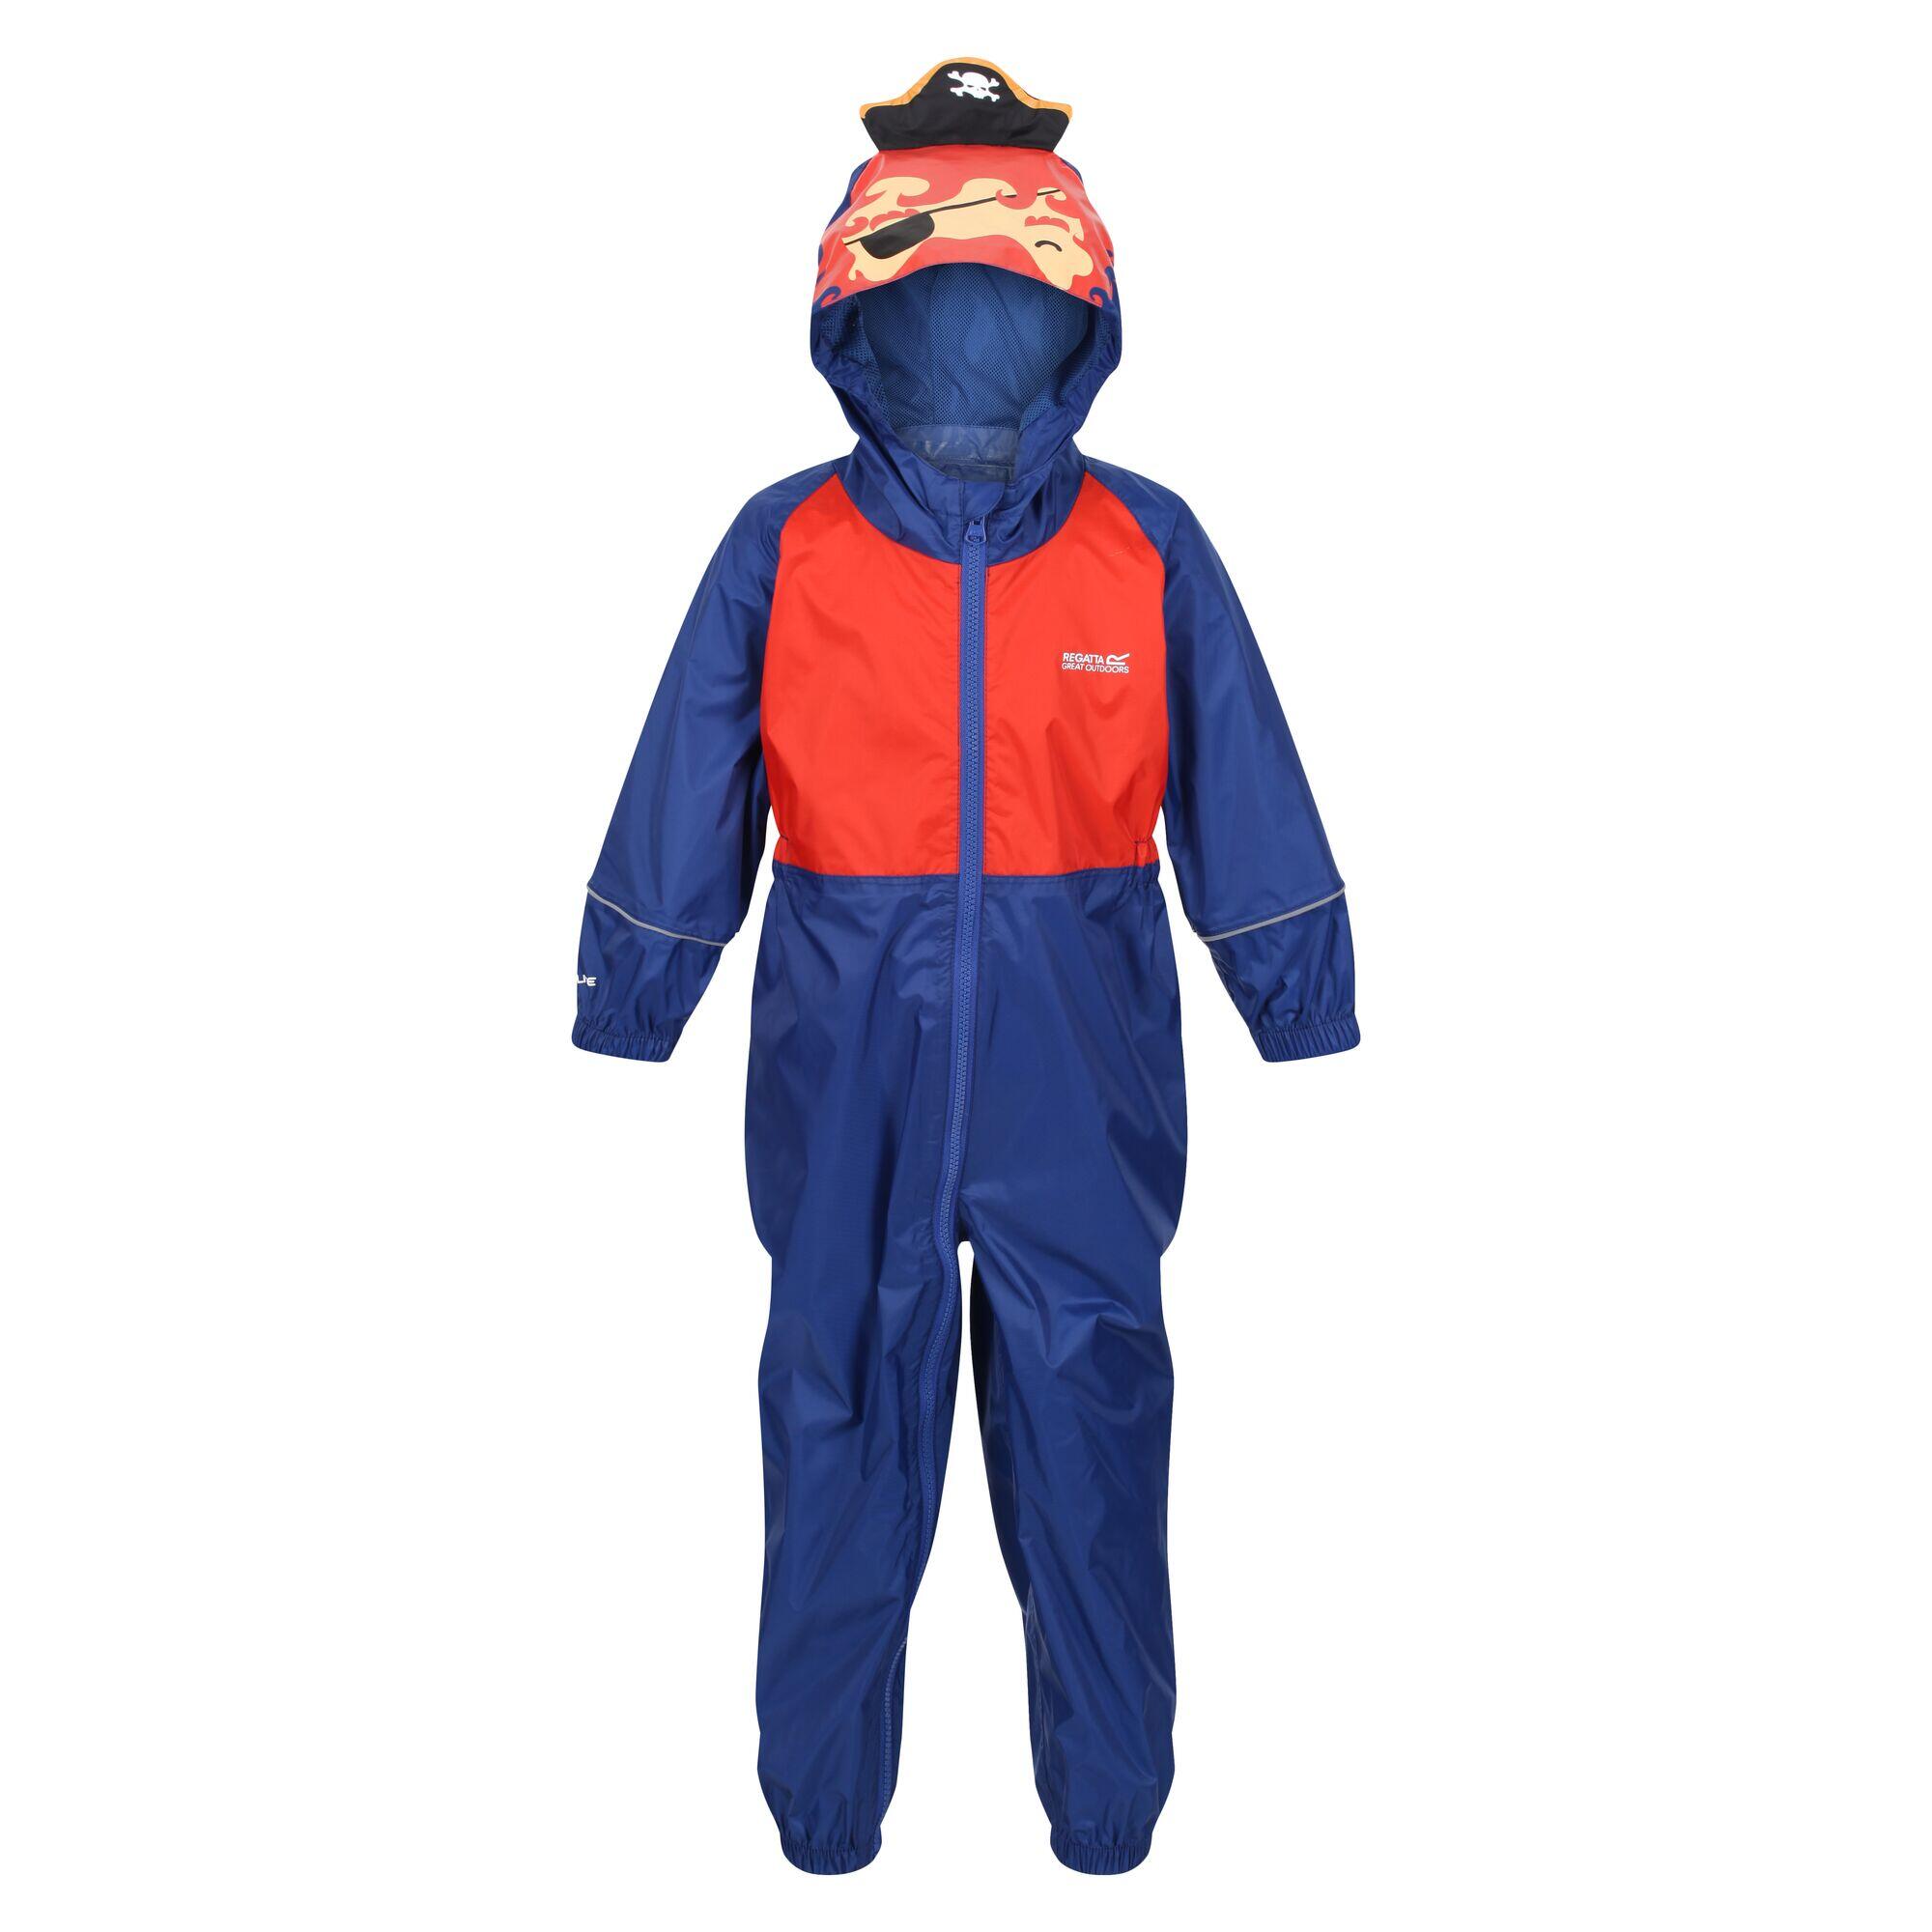 Charco Kids Hiking Hooded Puddle Suit - Blue Pirate 3/4